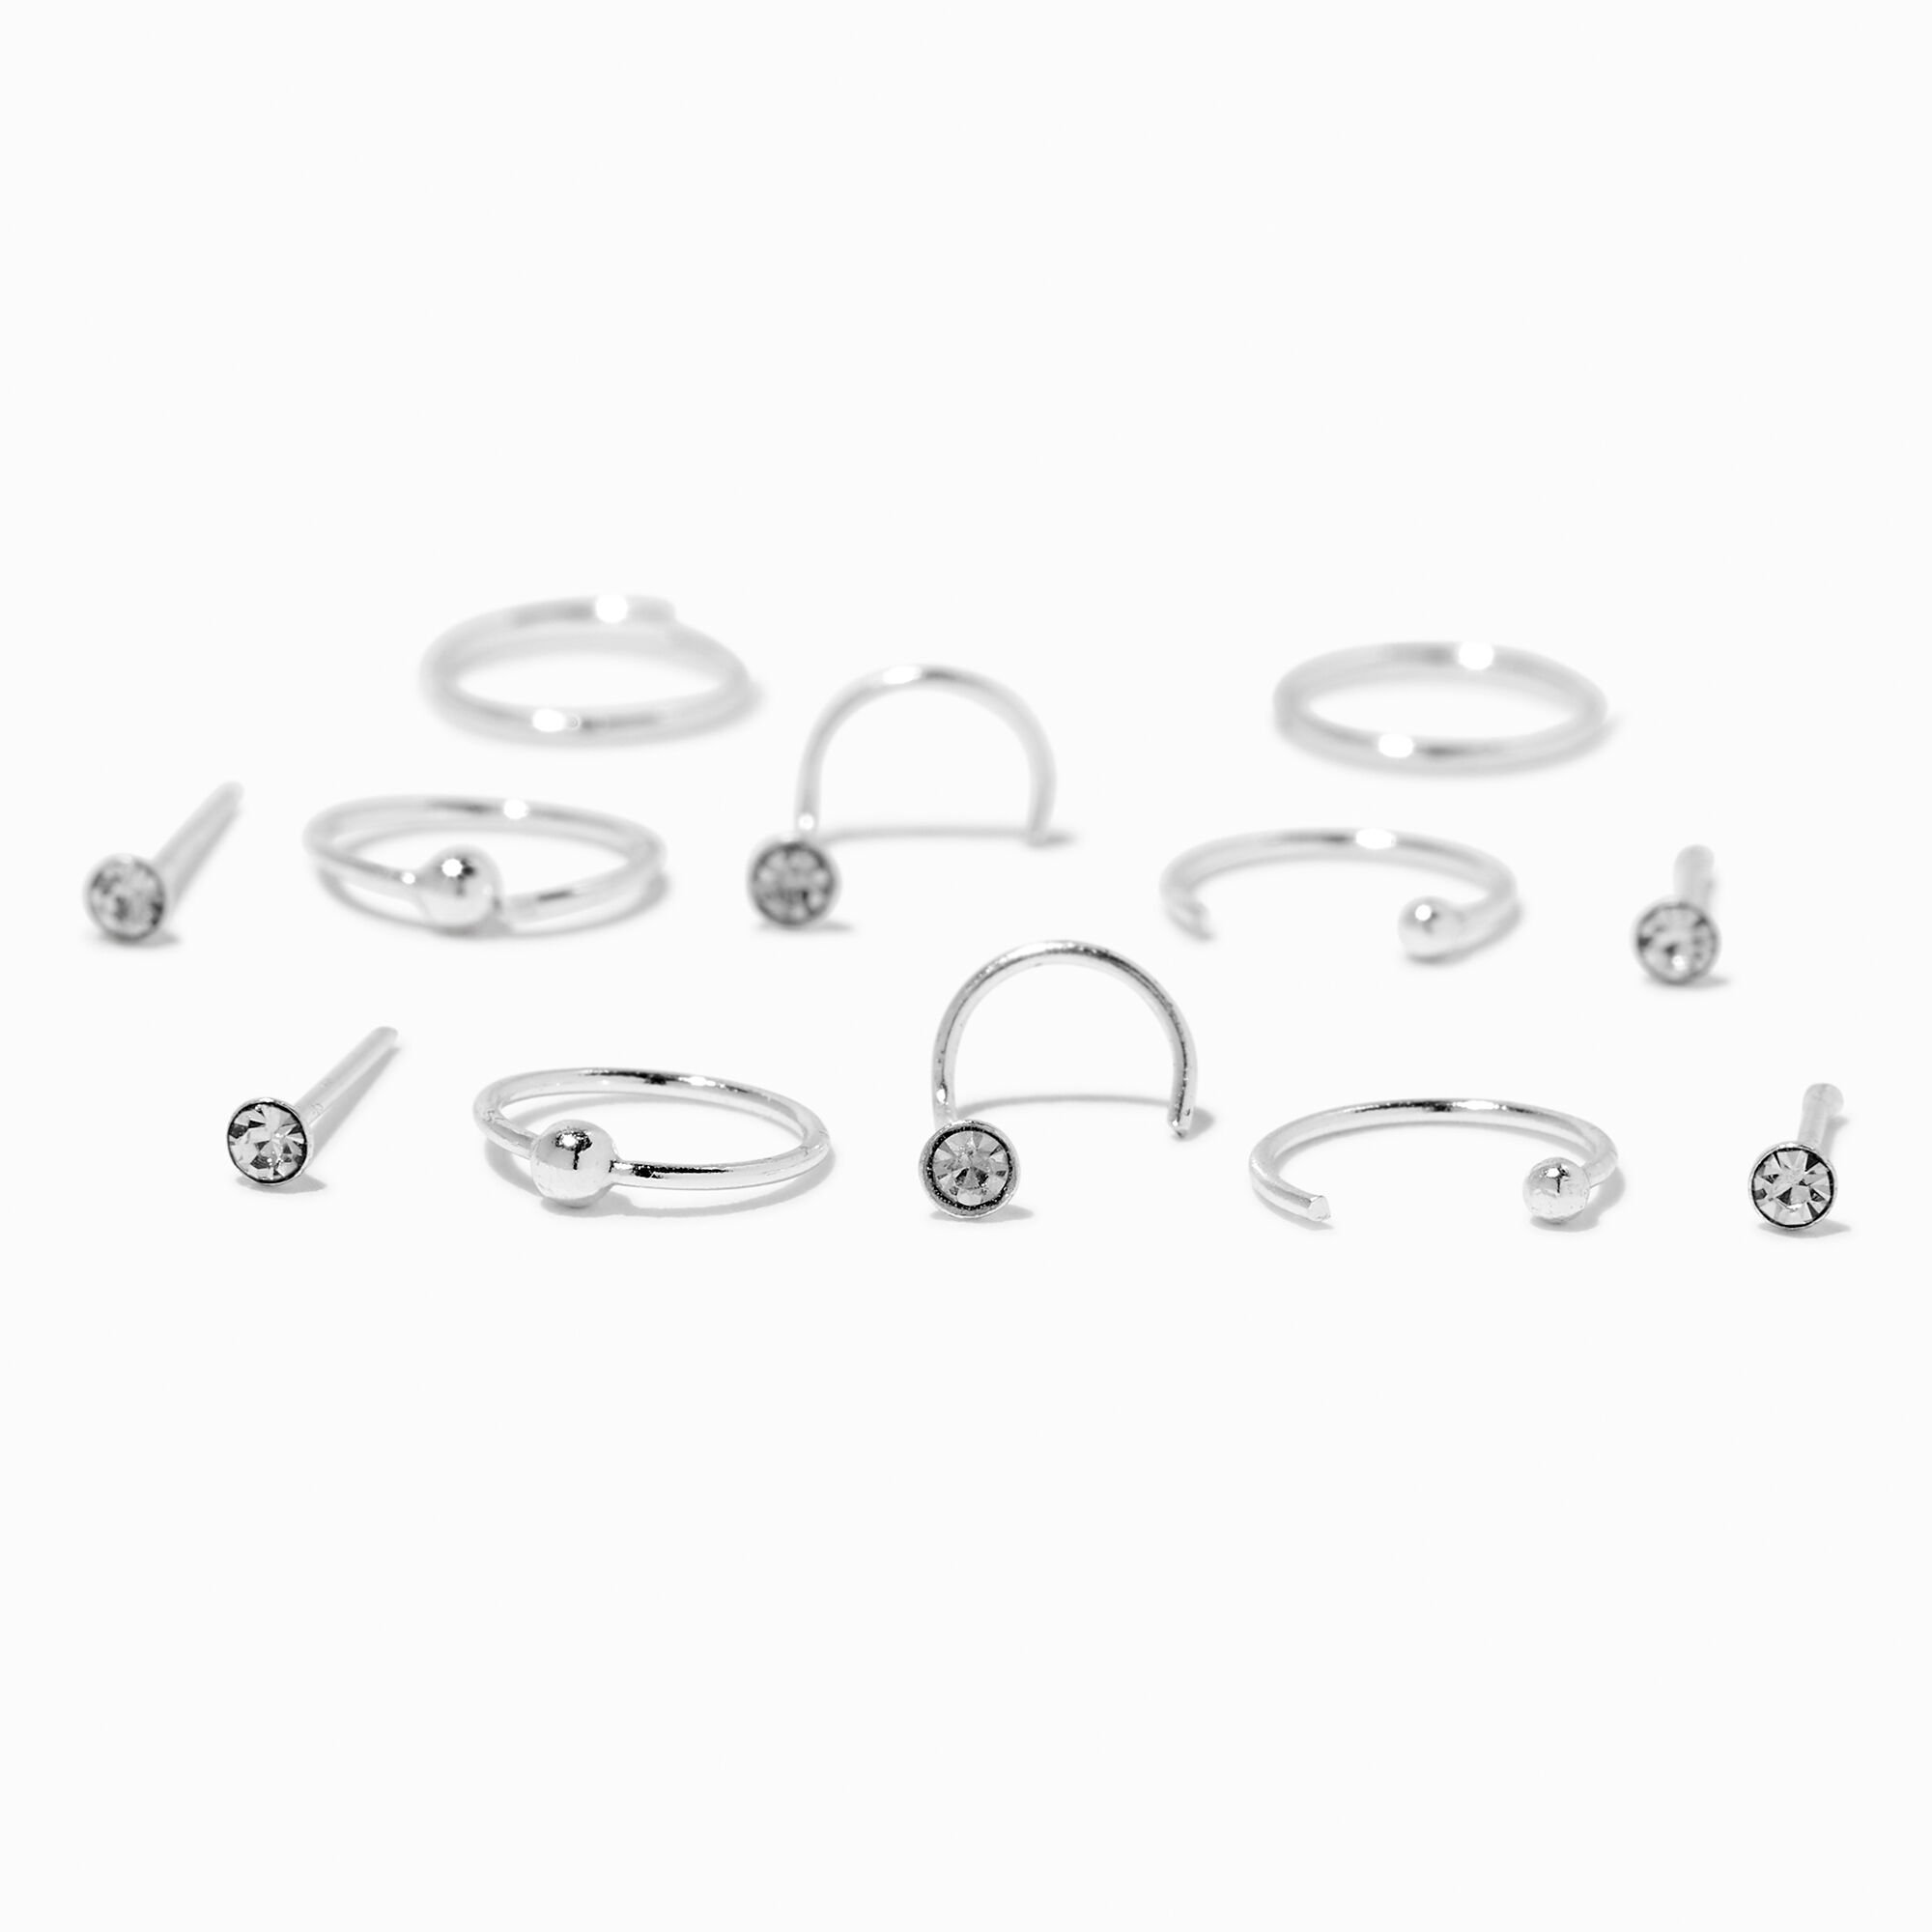 View Claires Crystal 22G Nose Studs Hoop 12 Pack Silver information